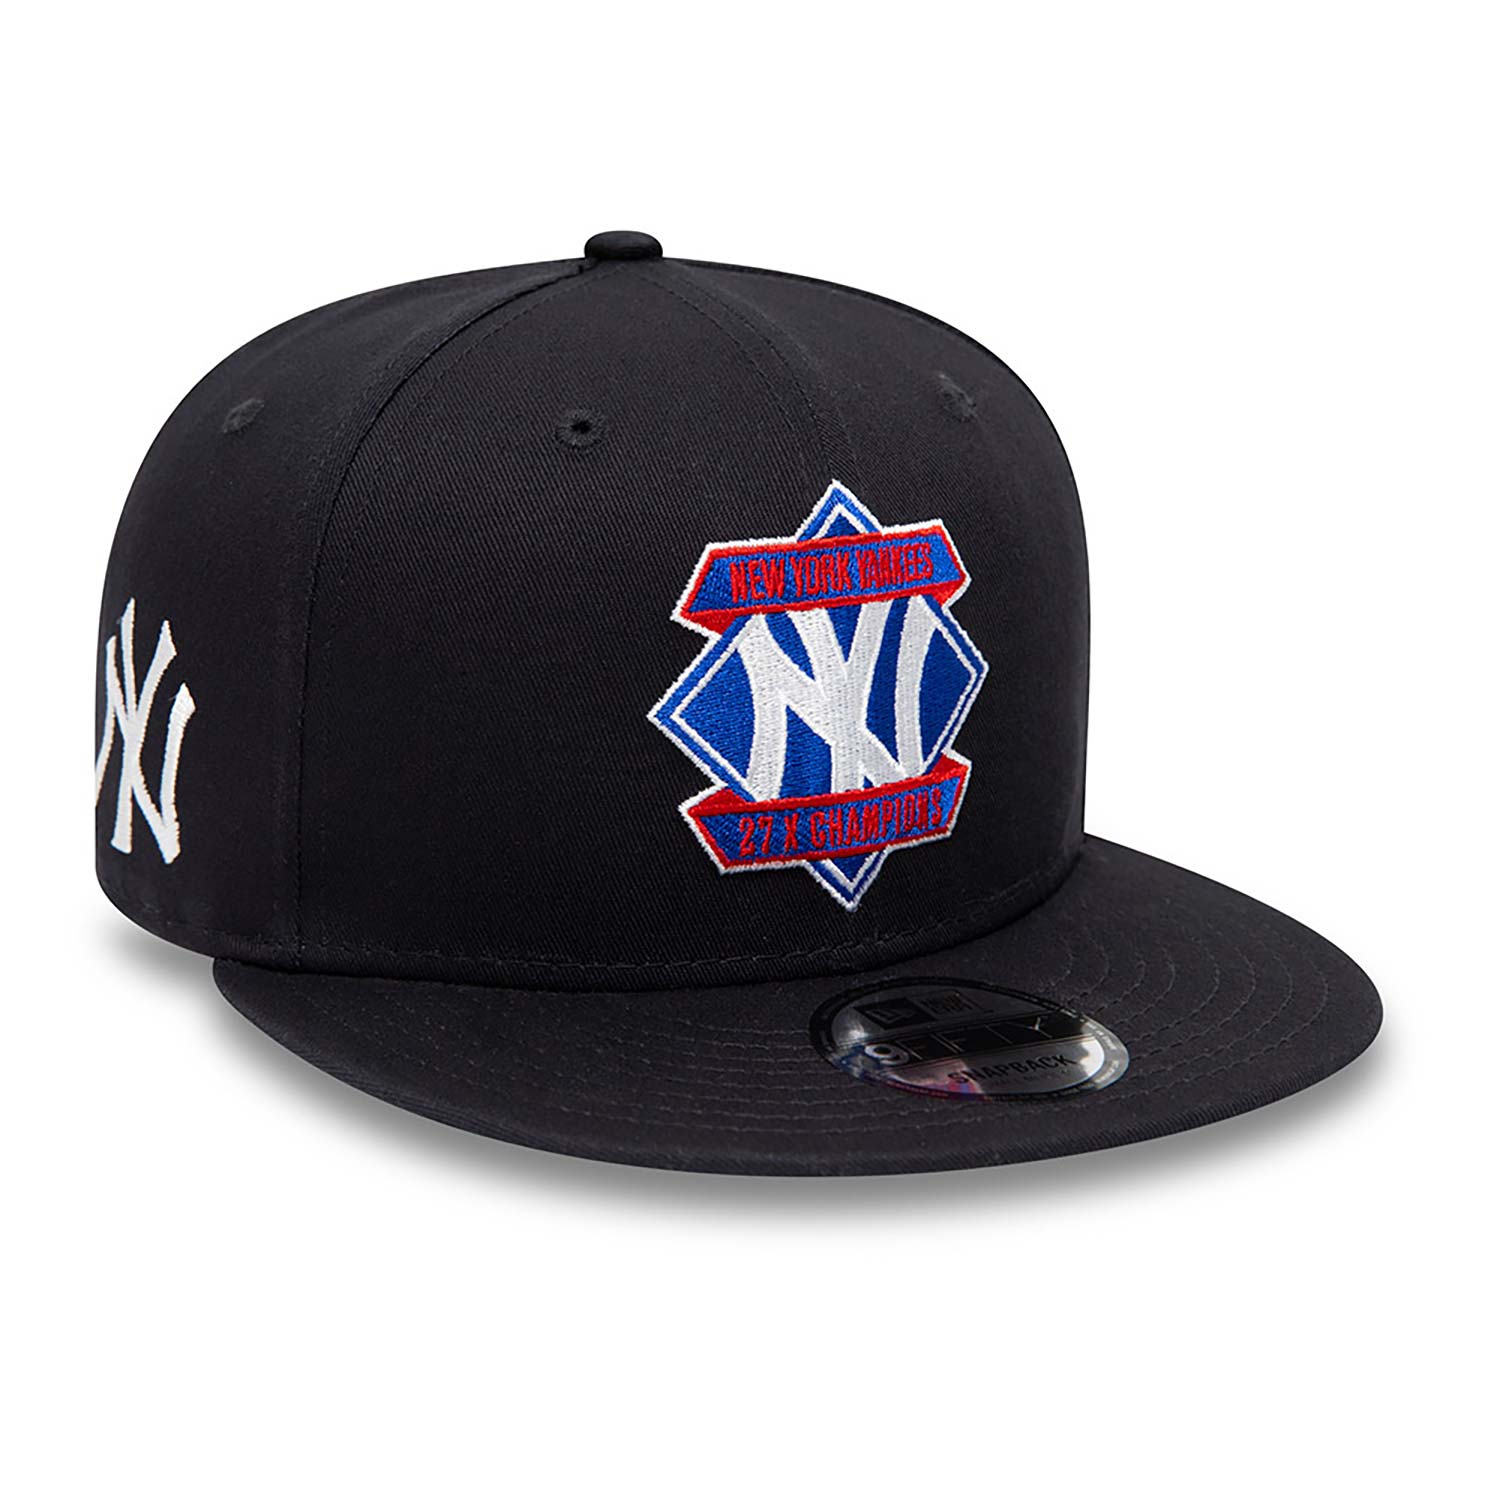 Official New Era Diamond Patch New York Yankees 9FIFTY Cap C125_241 ...